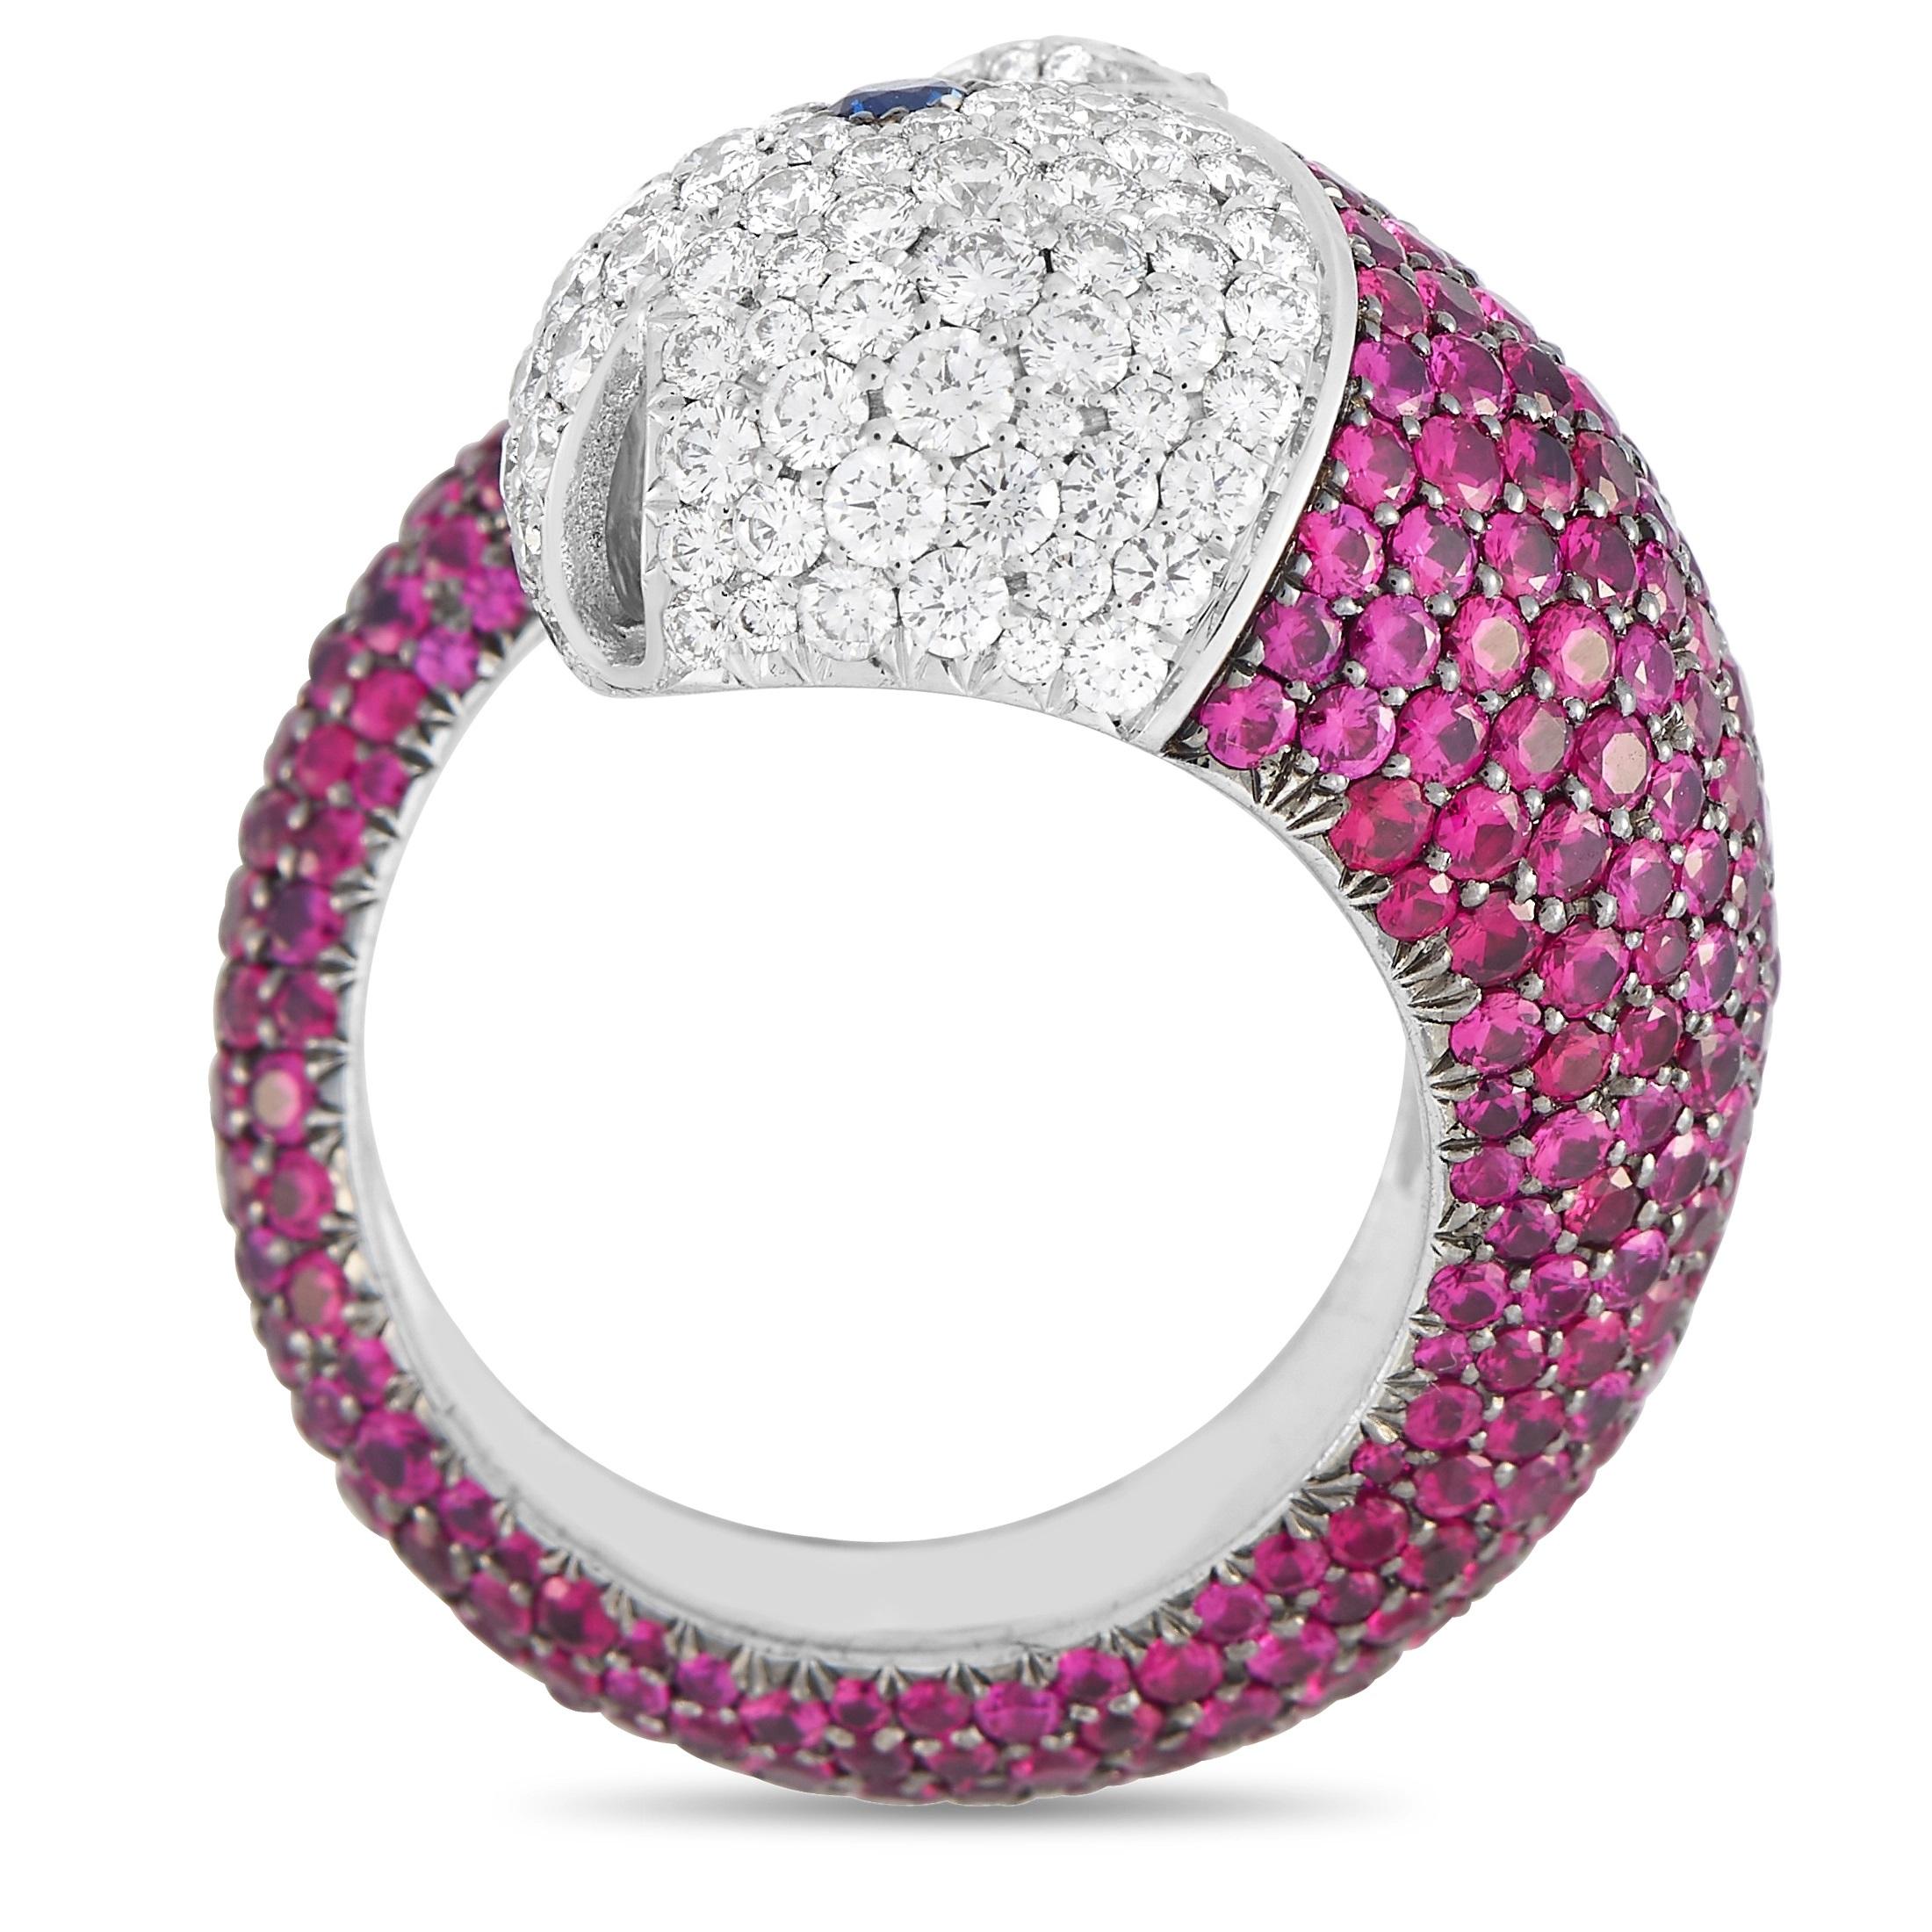 It doesn’t get any more charming than this exquisite accessory from Chopard. The fabulous fish-shaped design comes to life thanks to glittering diamonds totaling 1.88 carats, a captivating array of rubies with a total weight of 5.52 carats, and a